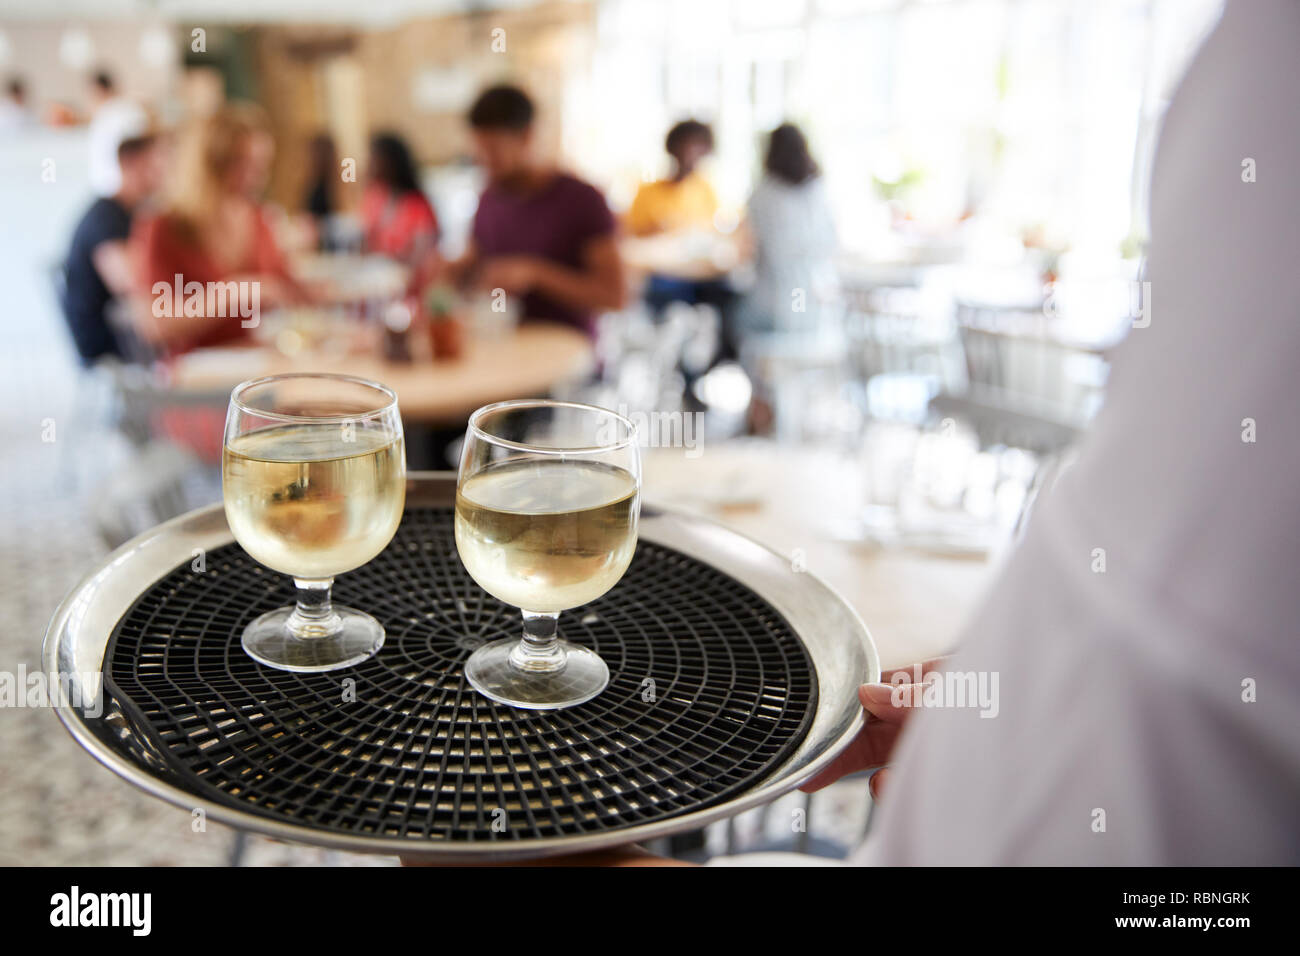 Tray with drinks carried by waiter at a restaurant, close up Stock Photo